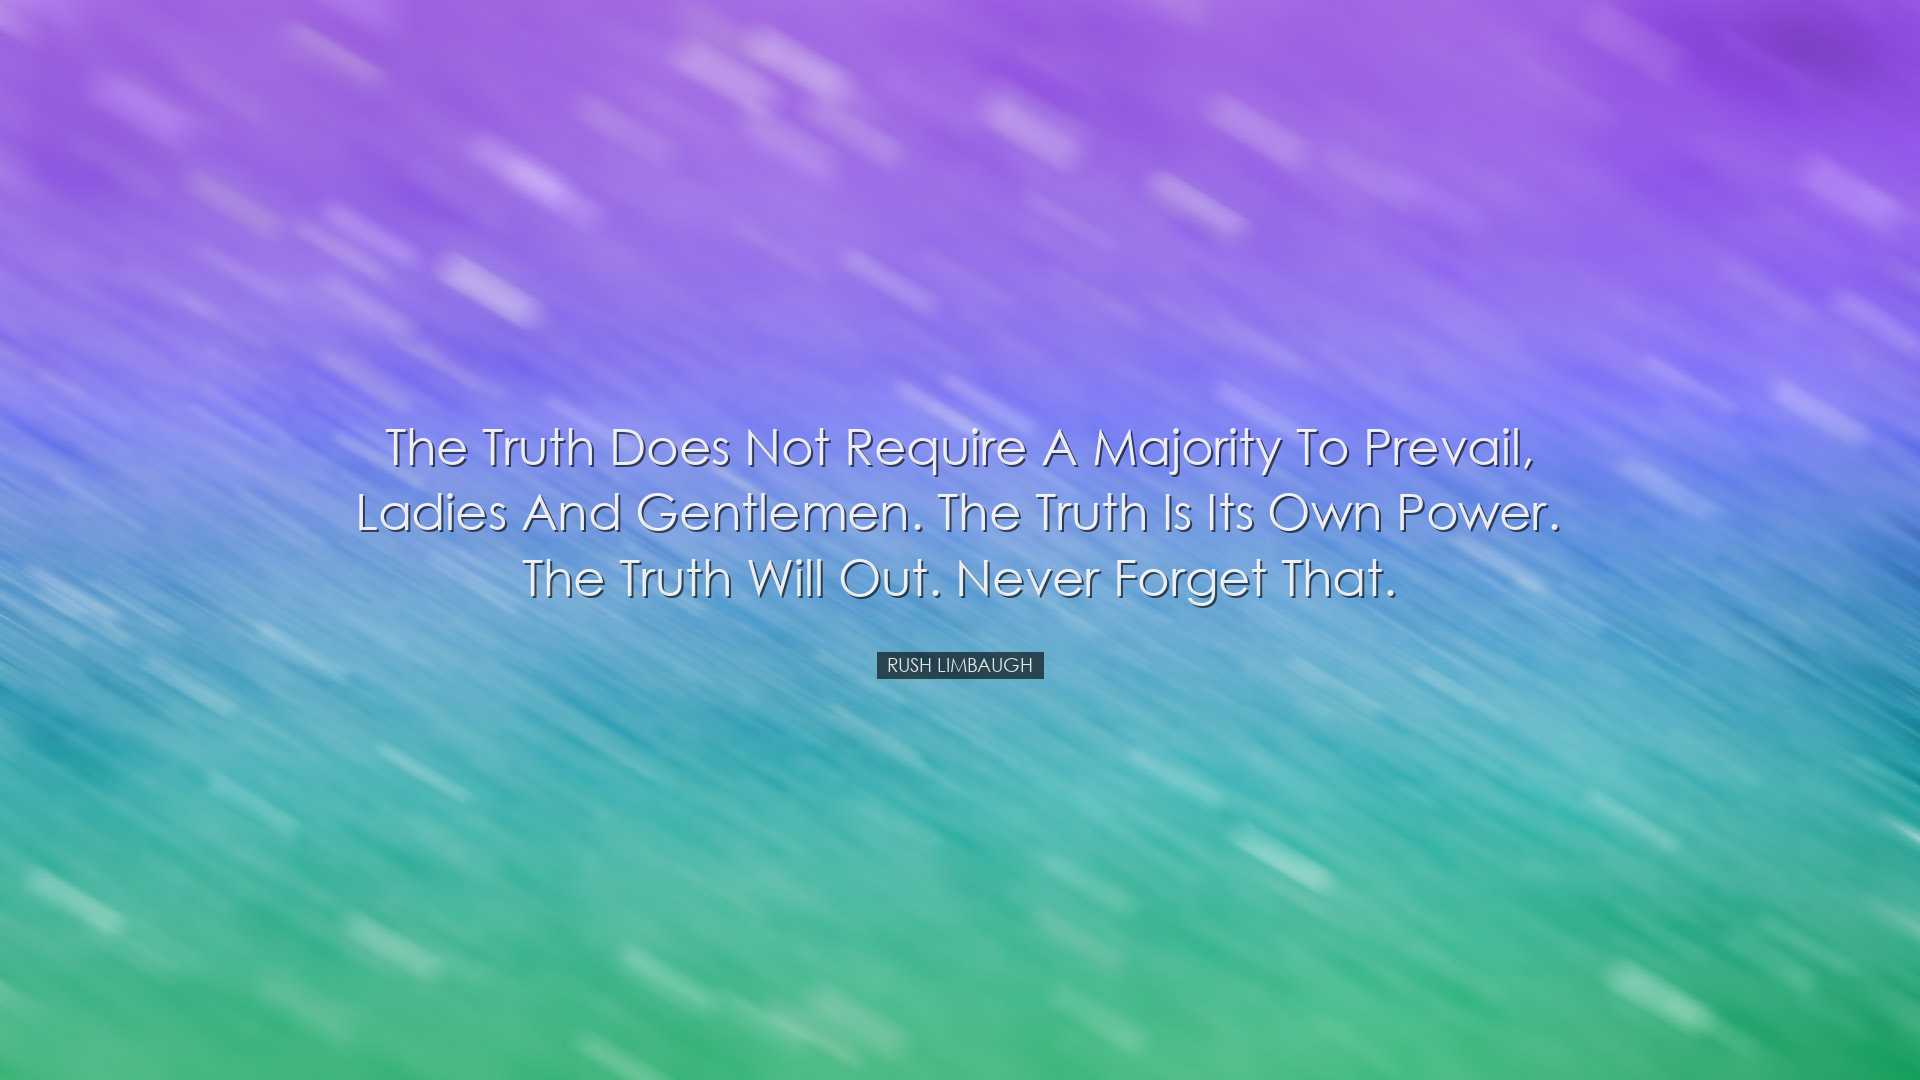 The truth does not require a majority to prevail, ladies and gentl